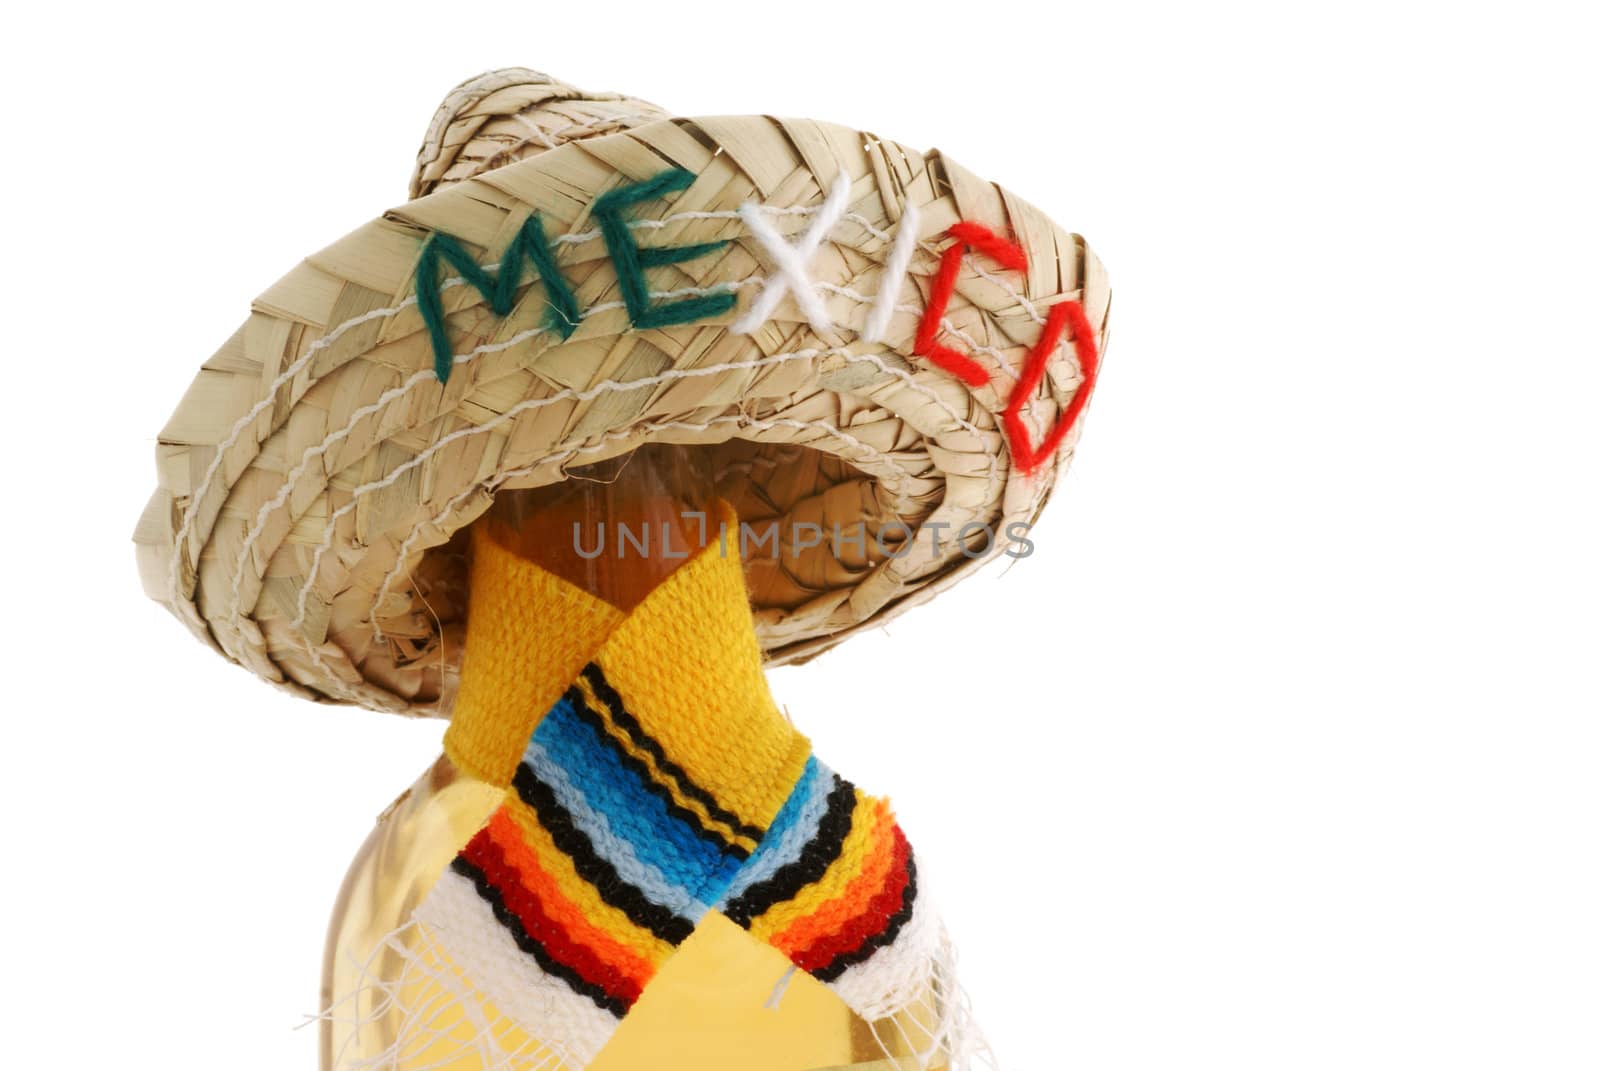 Bottle of booze with straw 'mexico' hat. by SasPartout